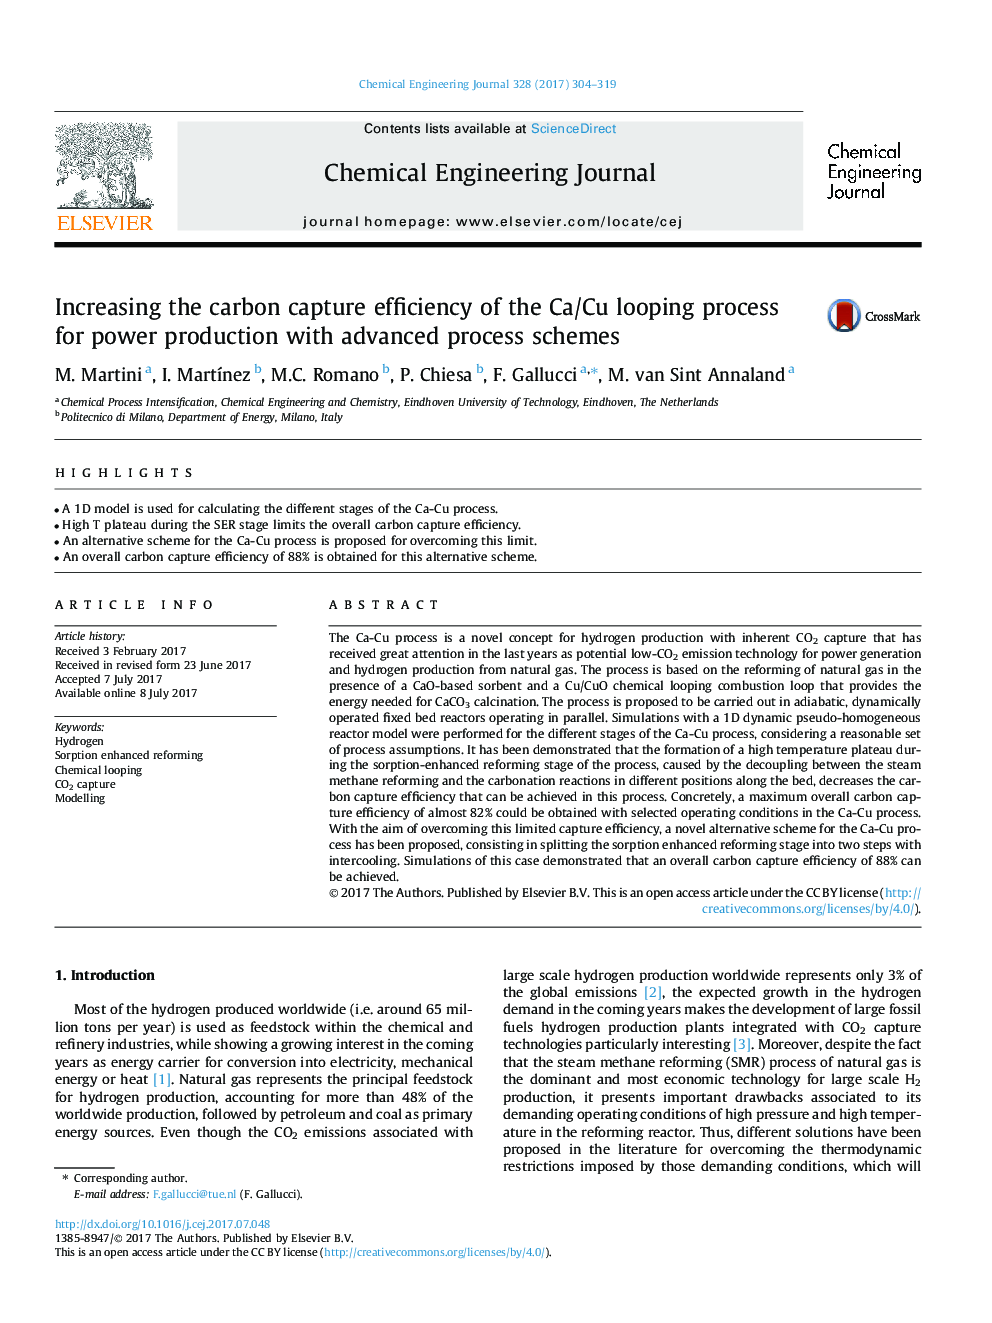 Increasing the carbon capture efficiency of the Ca/Cu looping process for power production with advanced process schemes